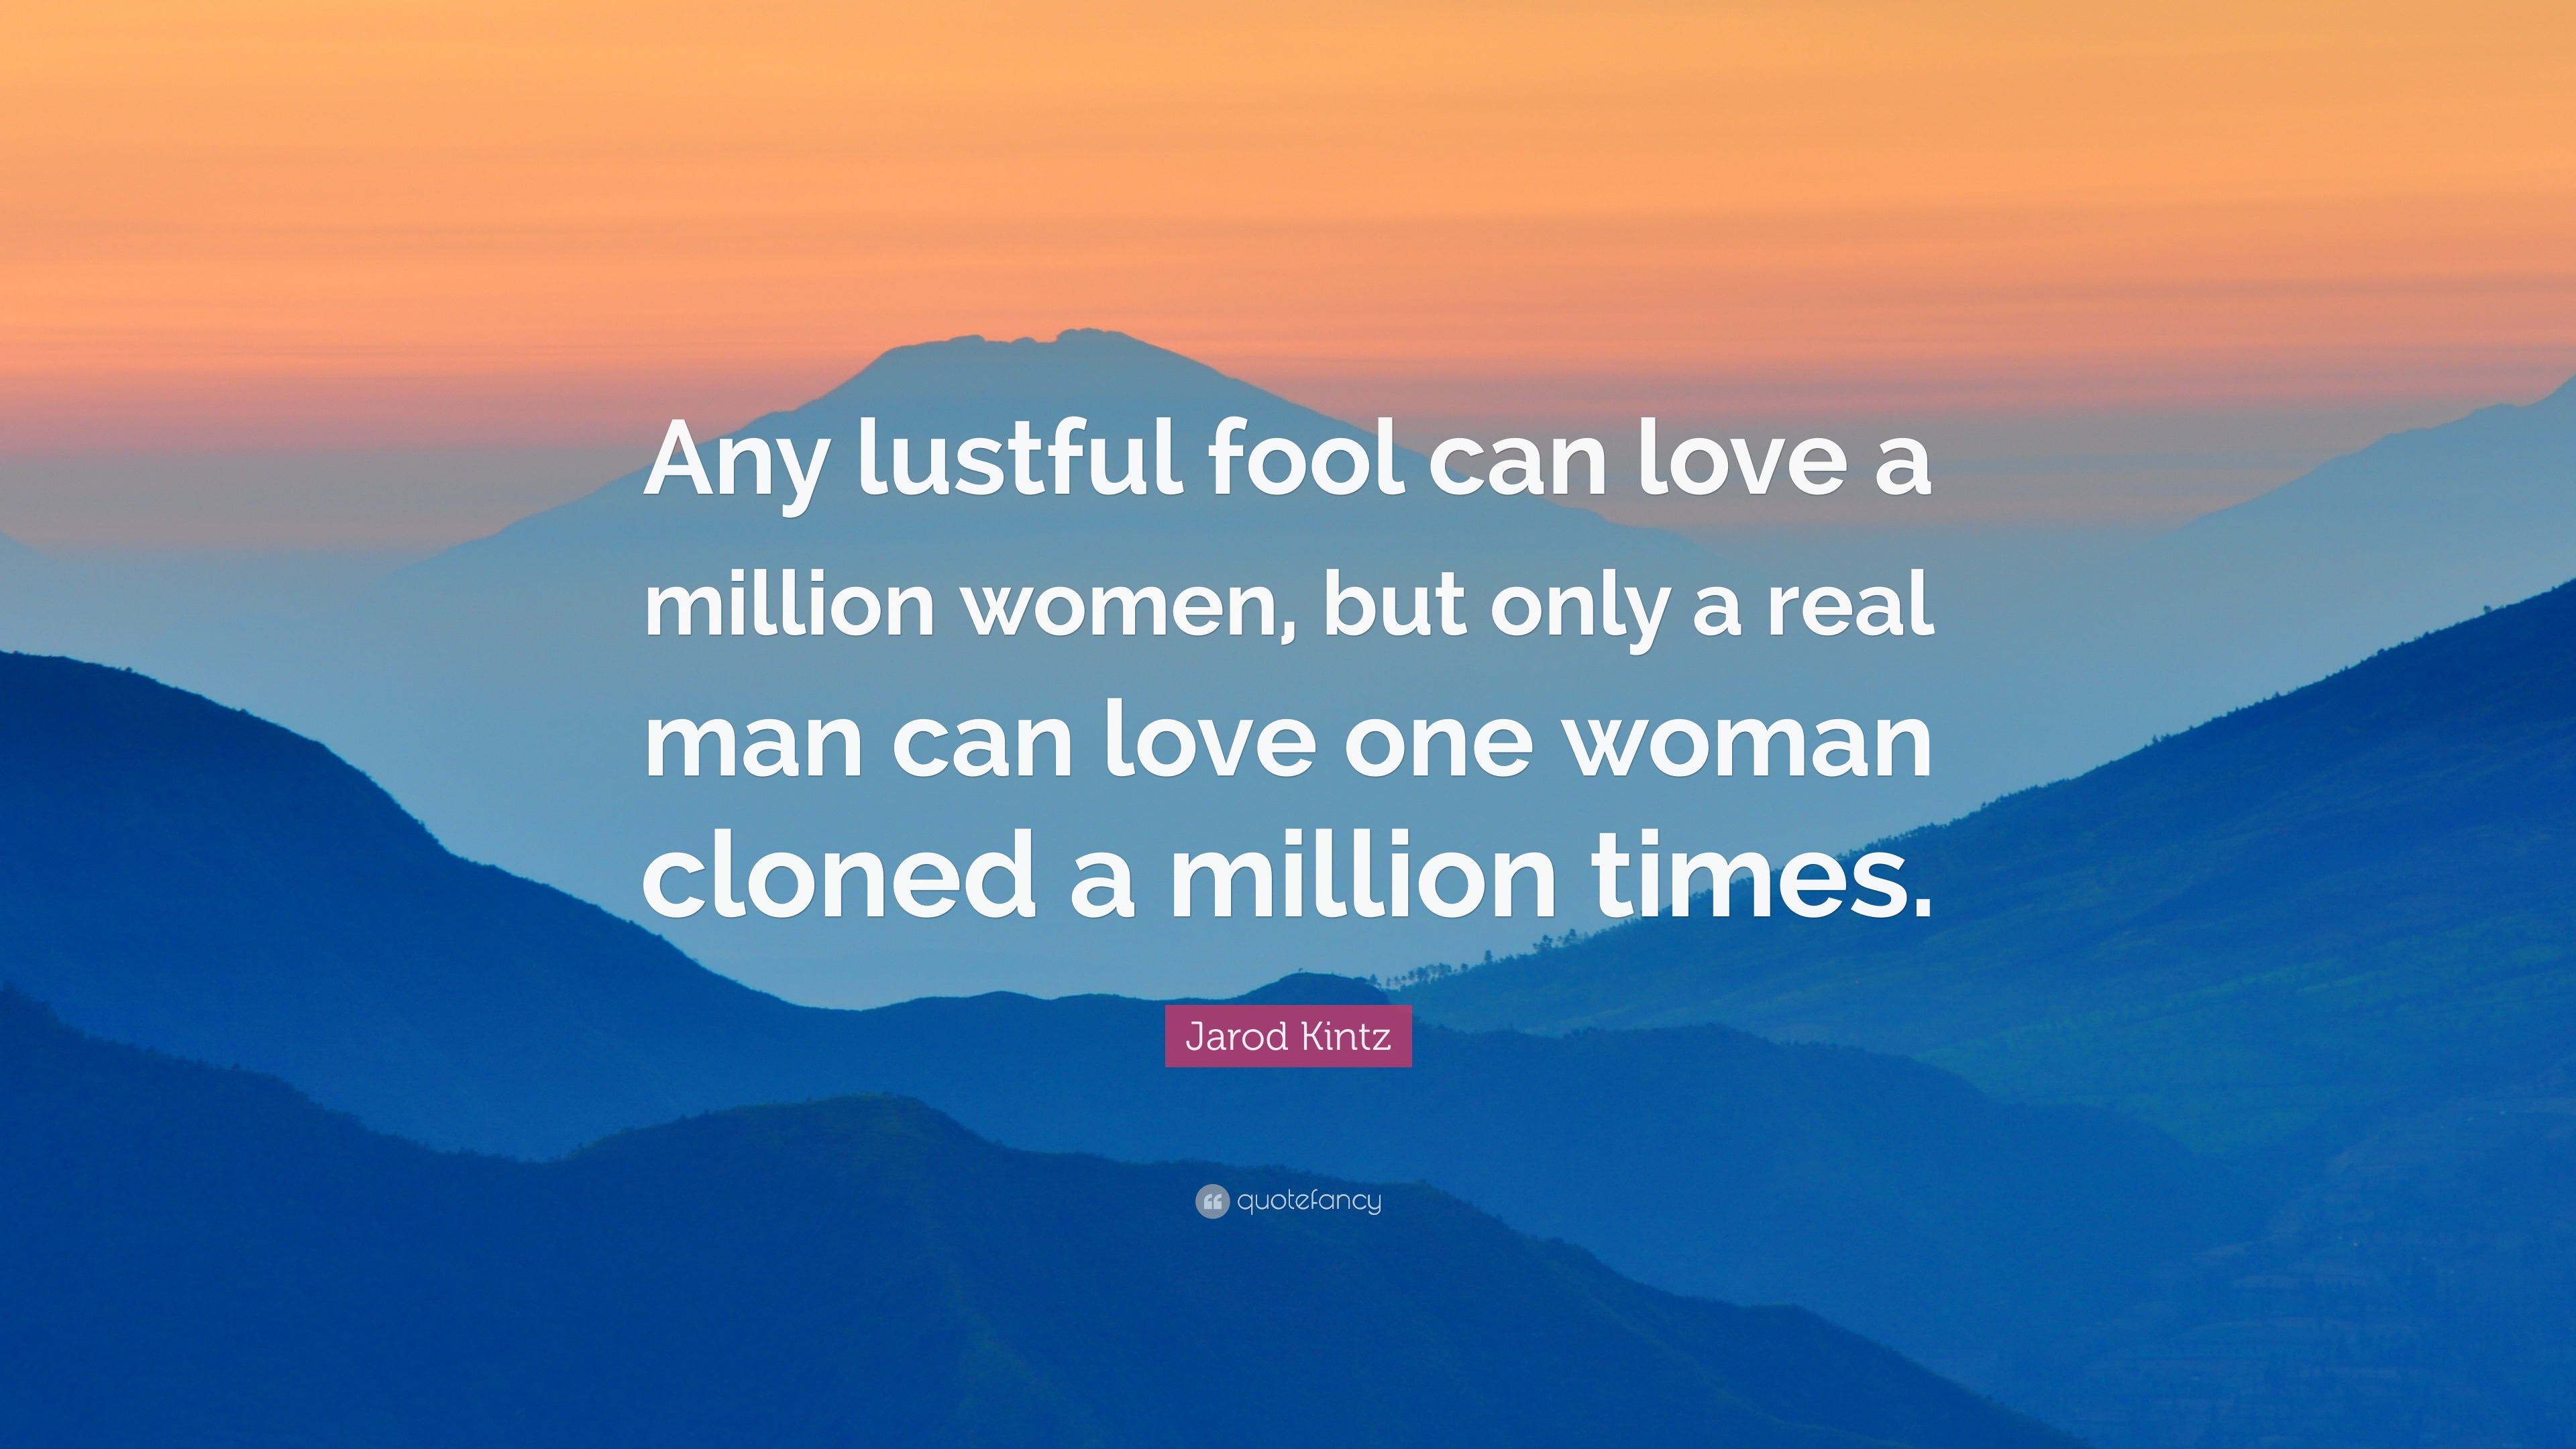 Jarod Kintz Quote “Any lustful fool can love a million women but only